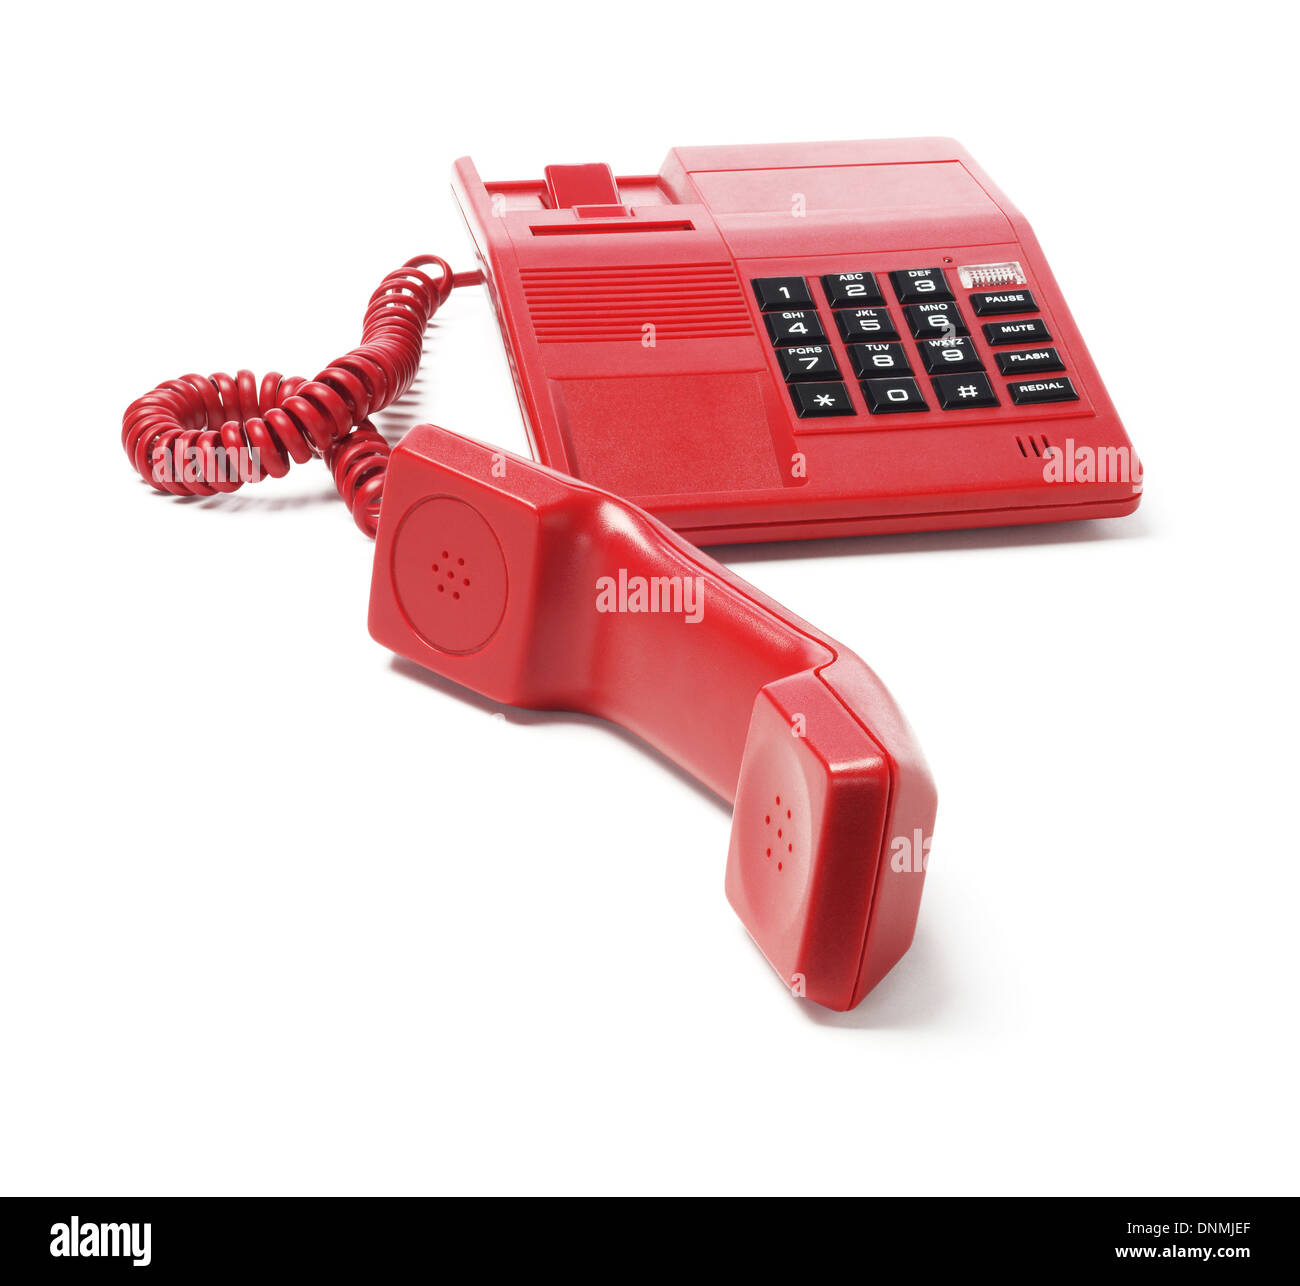 Red Telephone On White Background Stock Photo